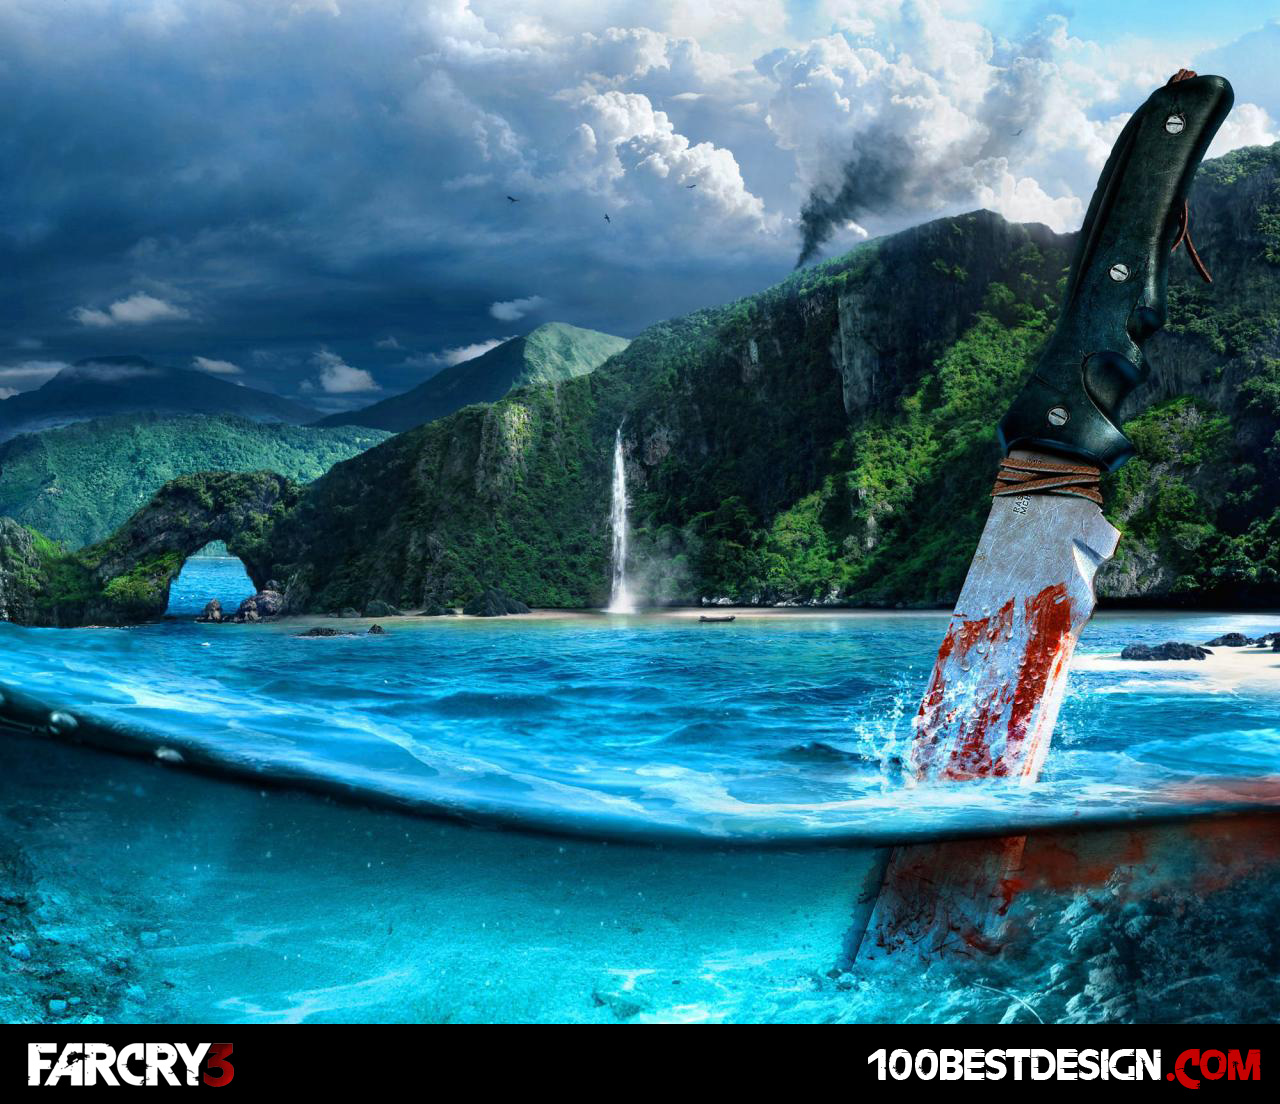 100 Best Far Cry 3 HD Wallpapers And Backgrounds 100 Best Design